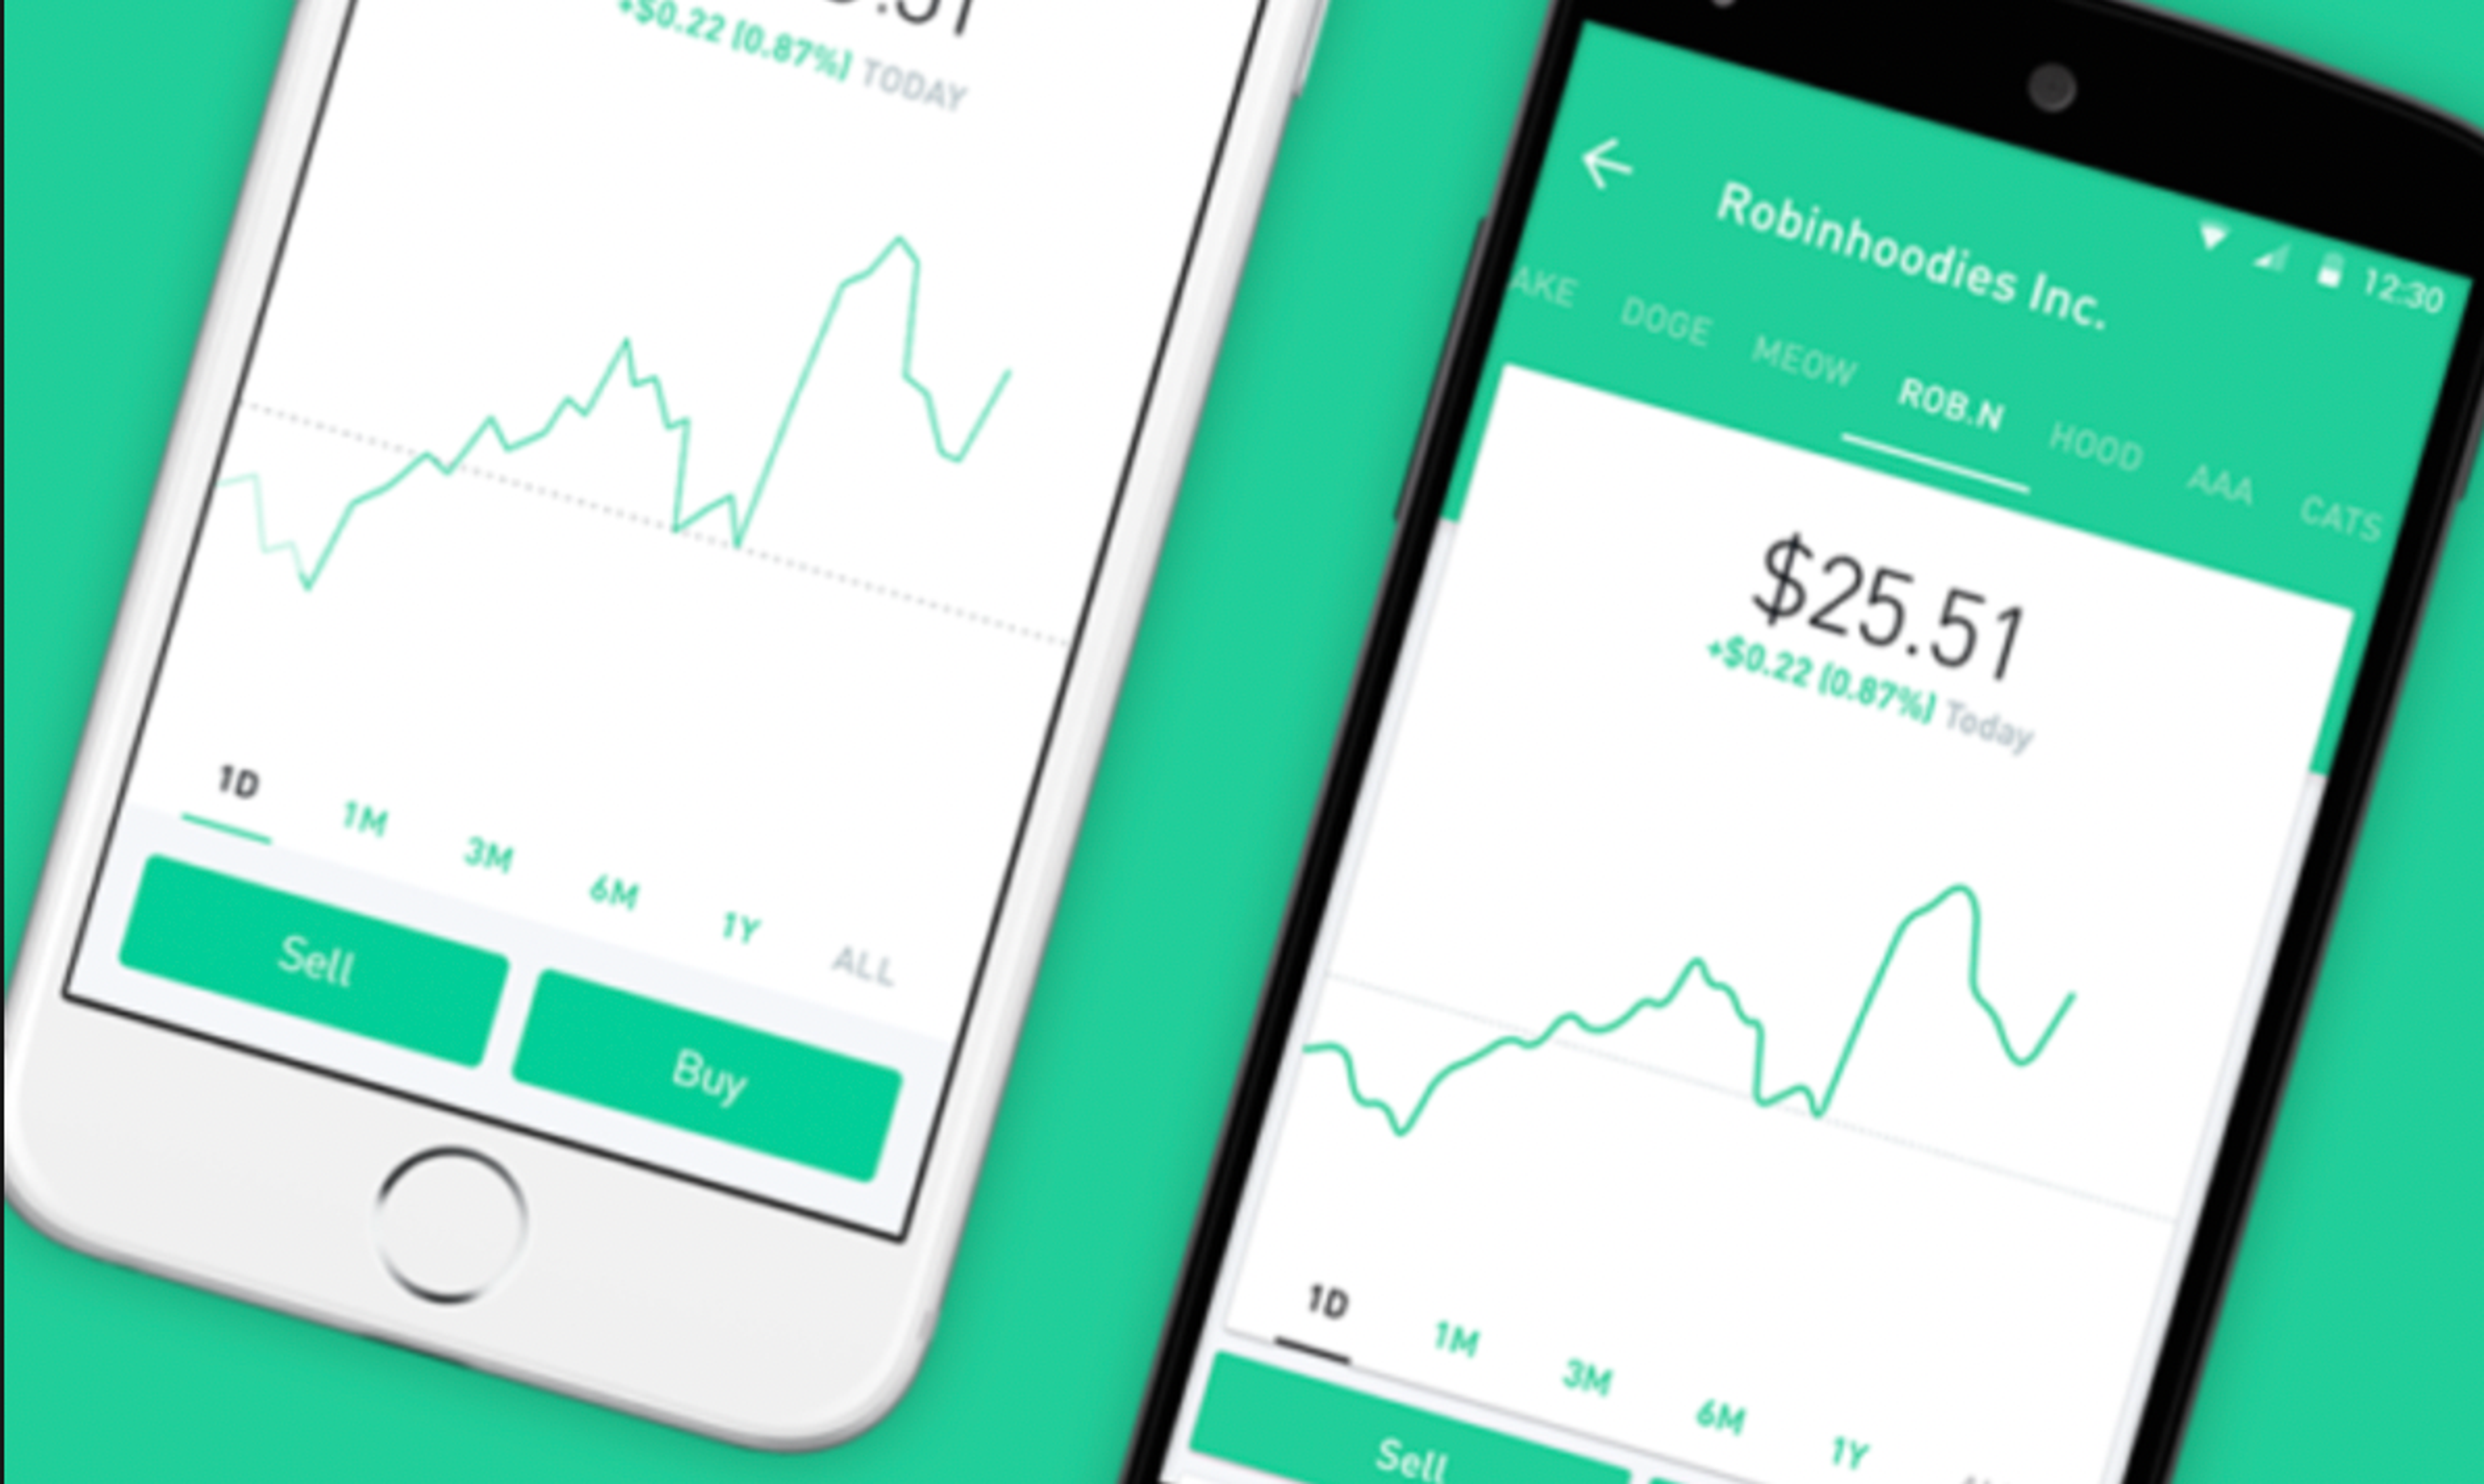 Robinhood Q1 Earnings Highlights: EPS And Revenue Miss, Monthly Active Users Fall, Company Remains Optimistic Of New Features